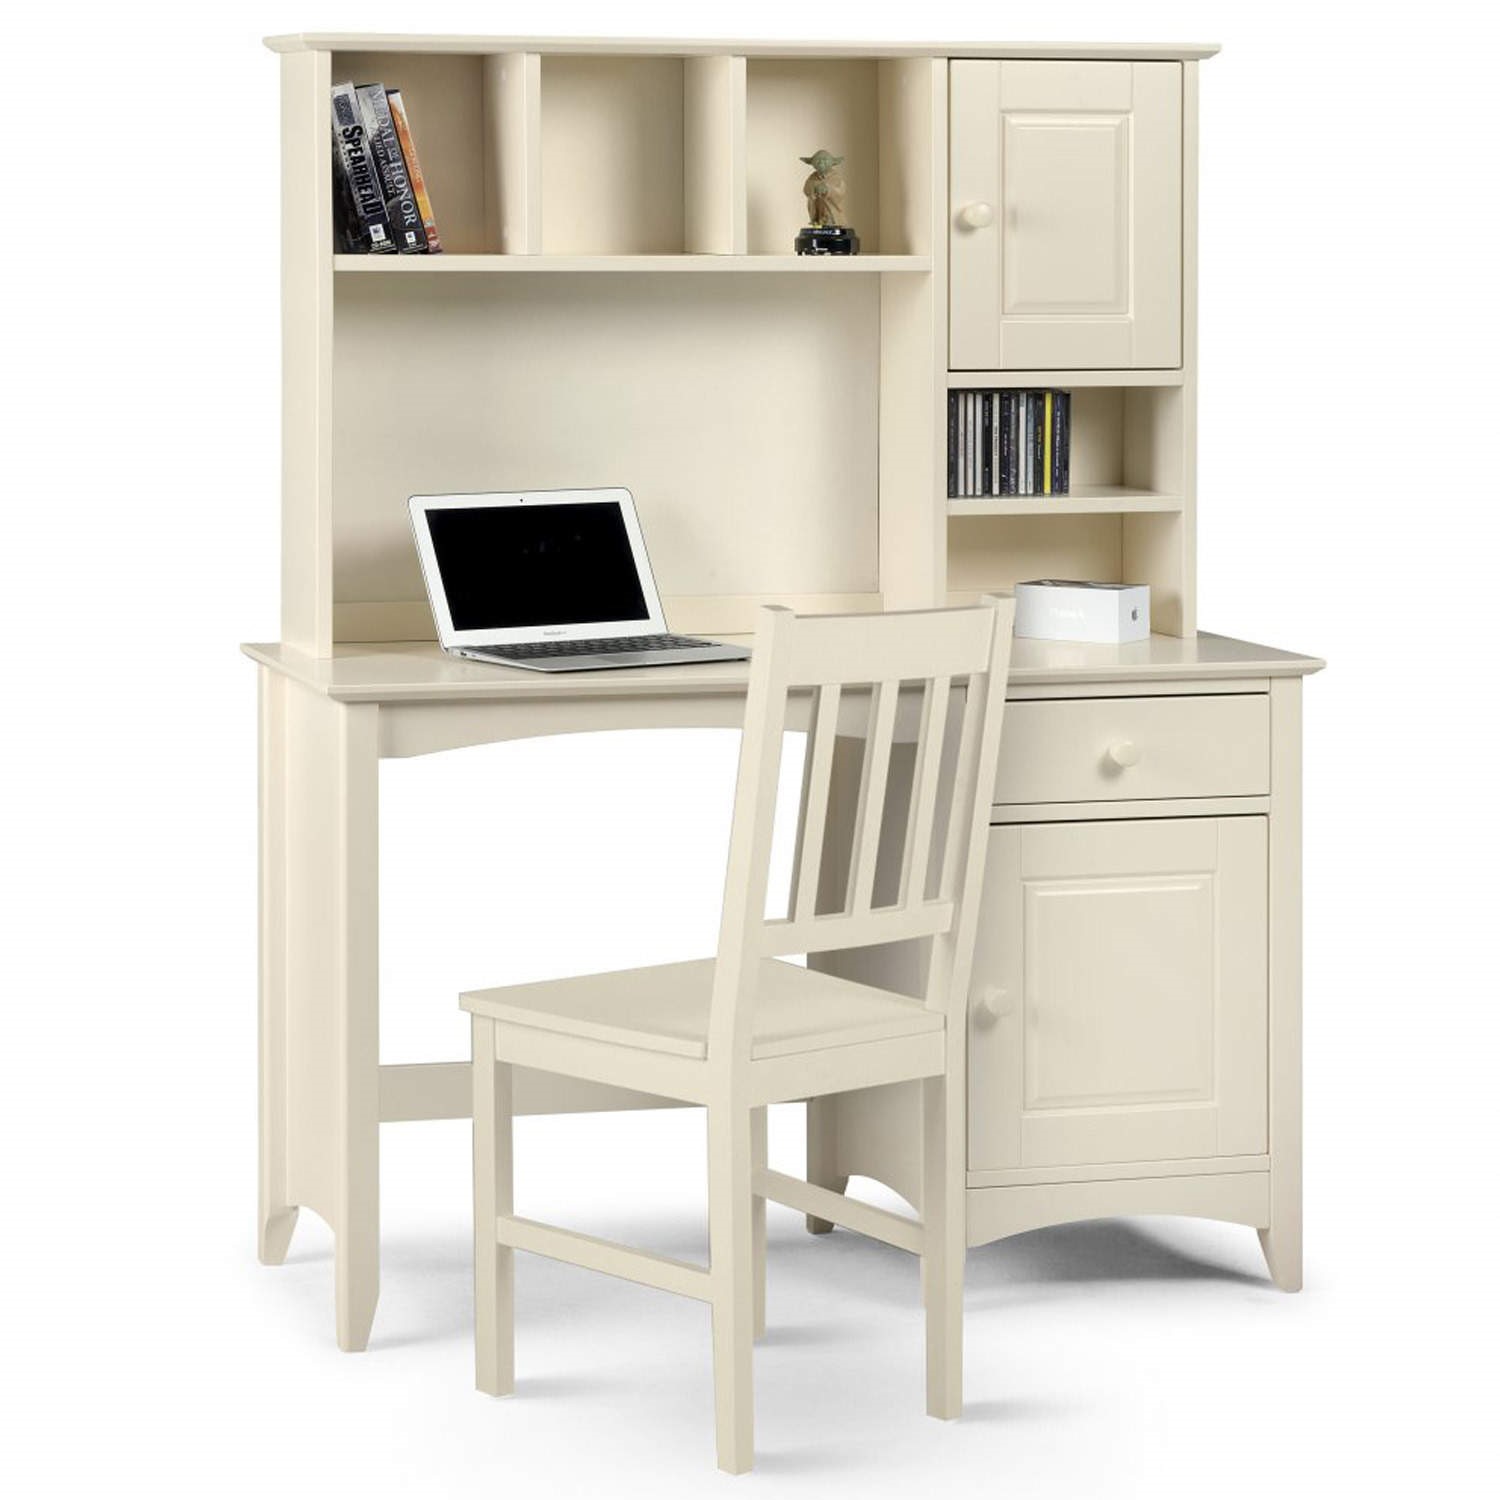 Read more about Stone wooden office desk with 1 drawer cameo julian bowen